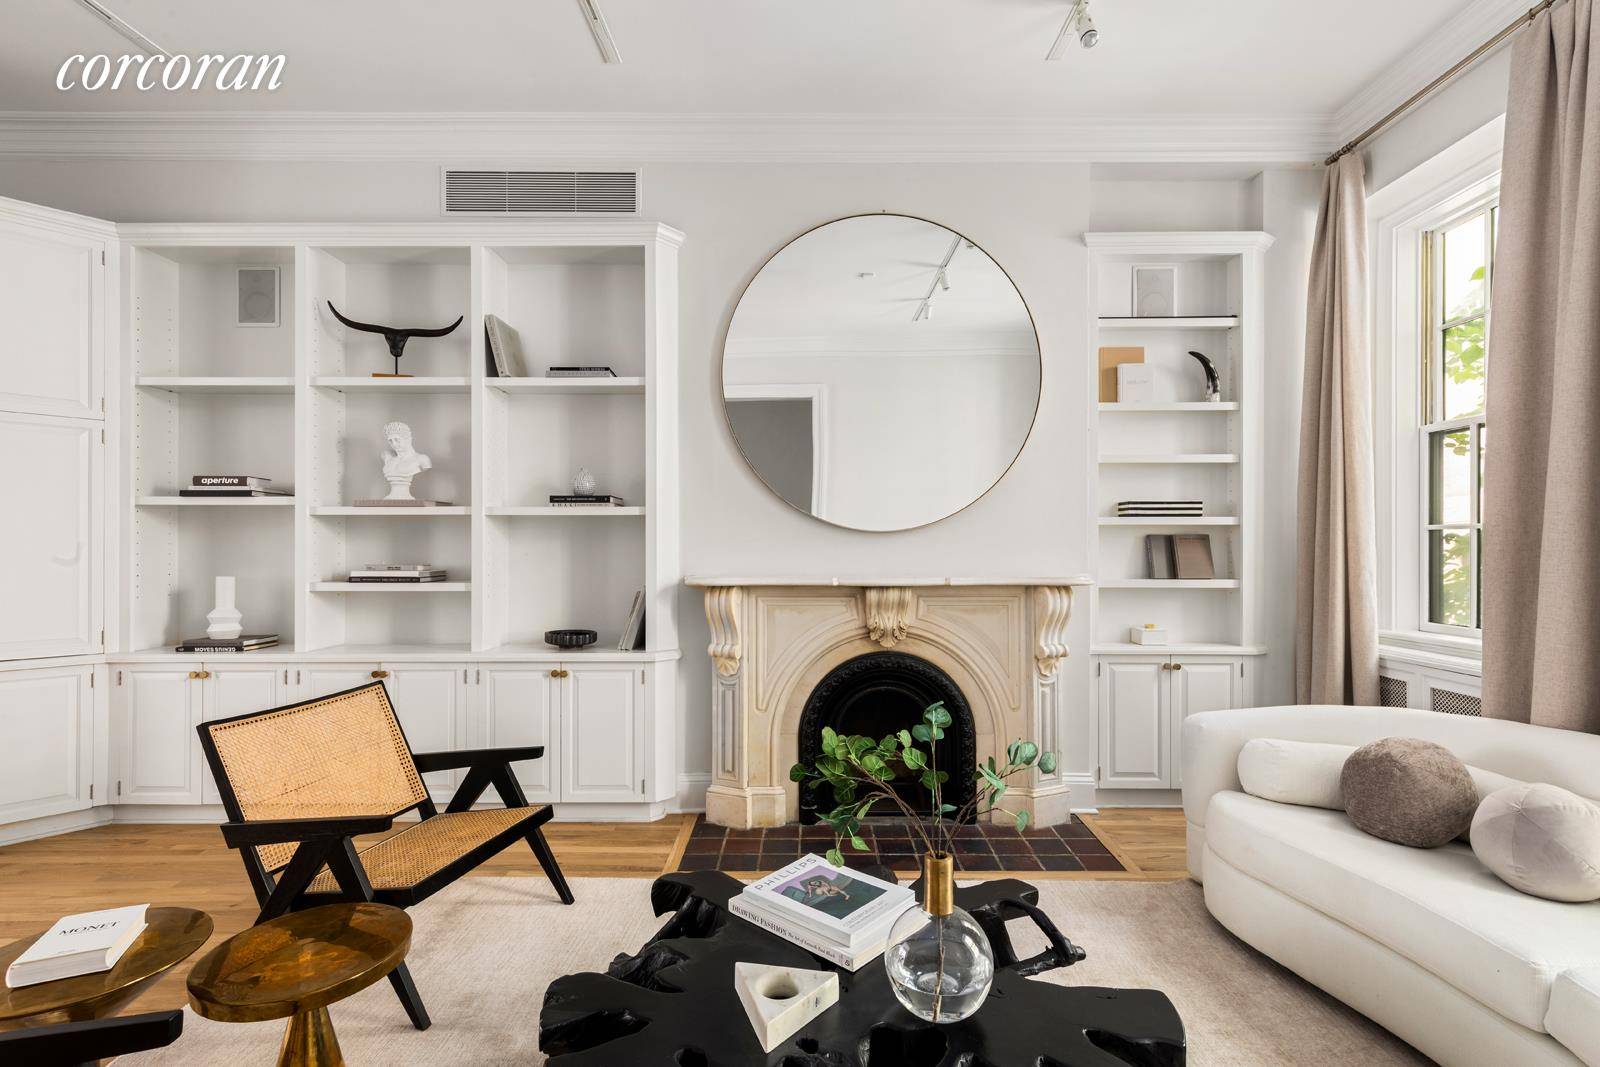 Quintessential Village charm meets modern refinement in this gorgeous, freshly updated reimagined gem at prized 112 West 13th Street.